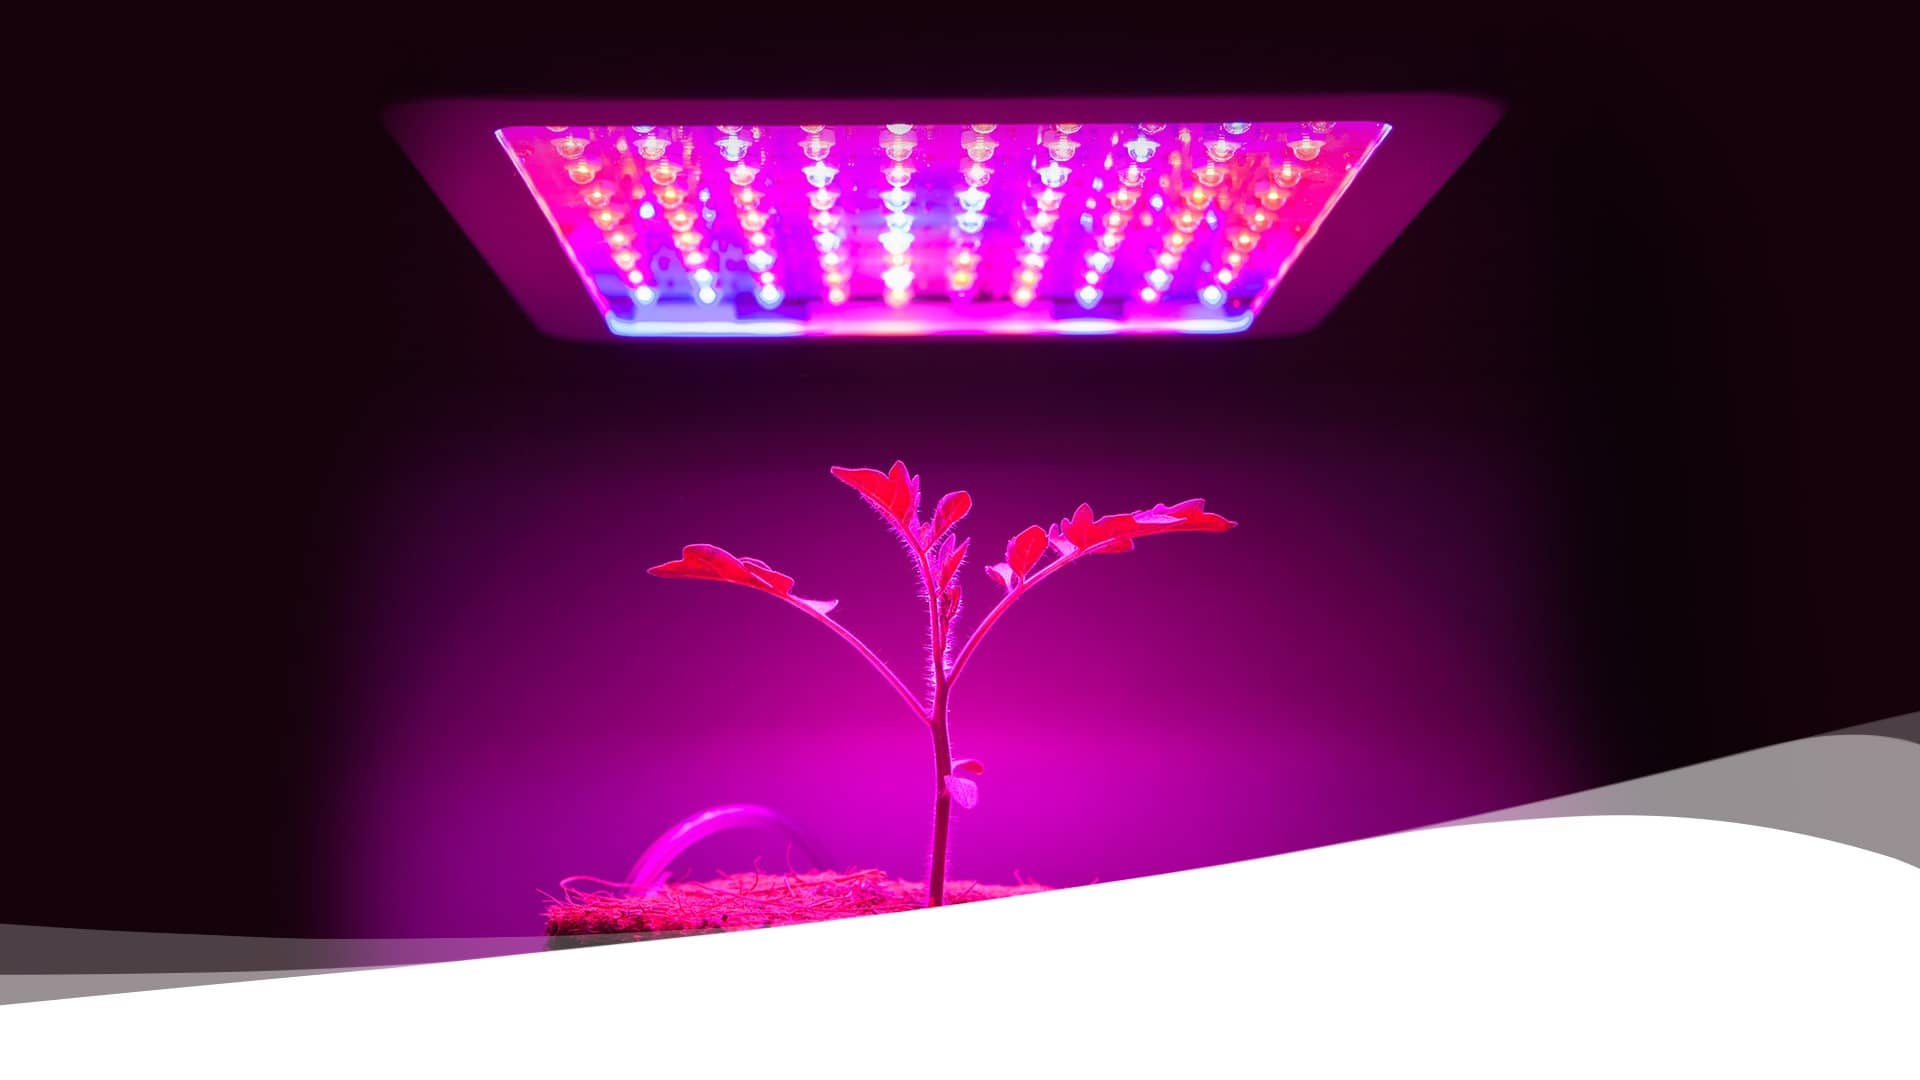 Dr. Muller light therapy research on growth plants